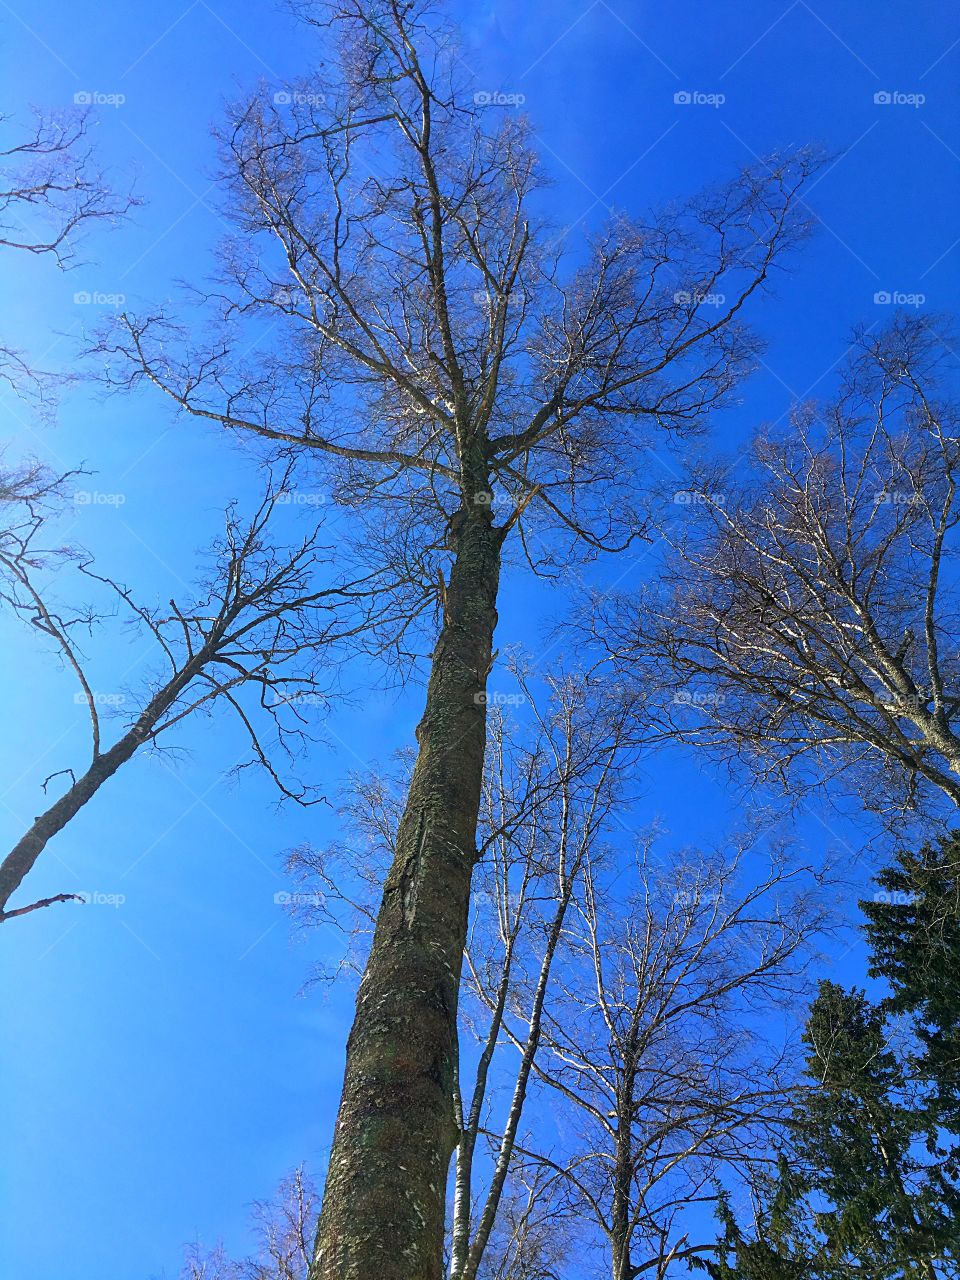 high tree without leaves us background with blue sky